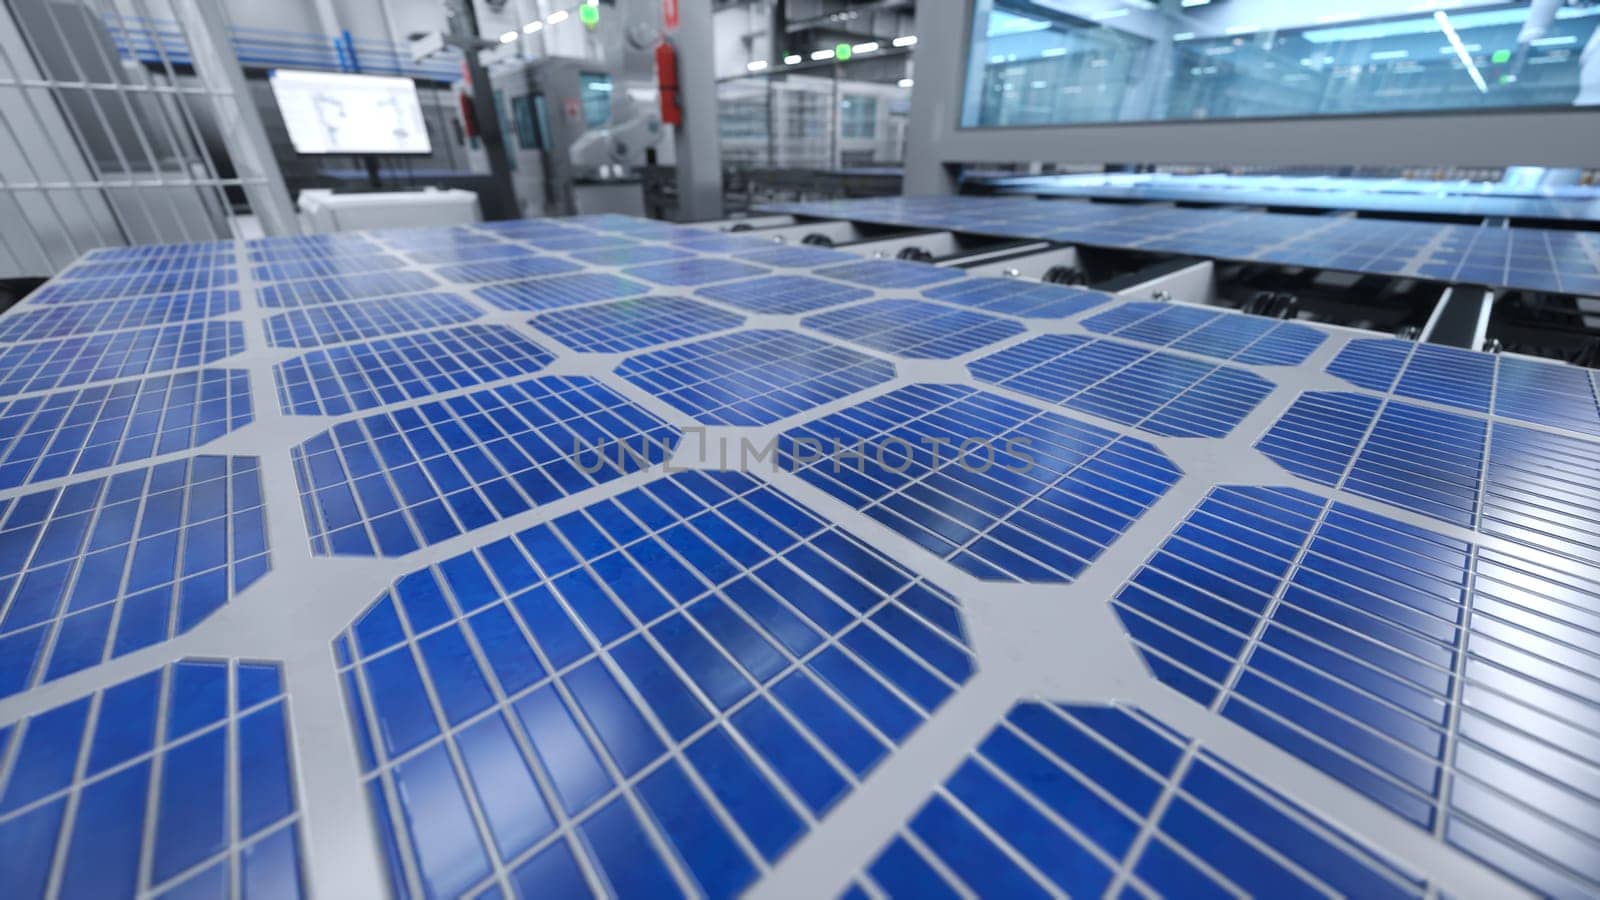 Solar panel placed on conveyor belt, operated by industrial robot arm, 3D illustration by DCStudio